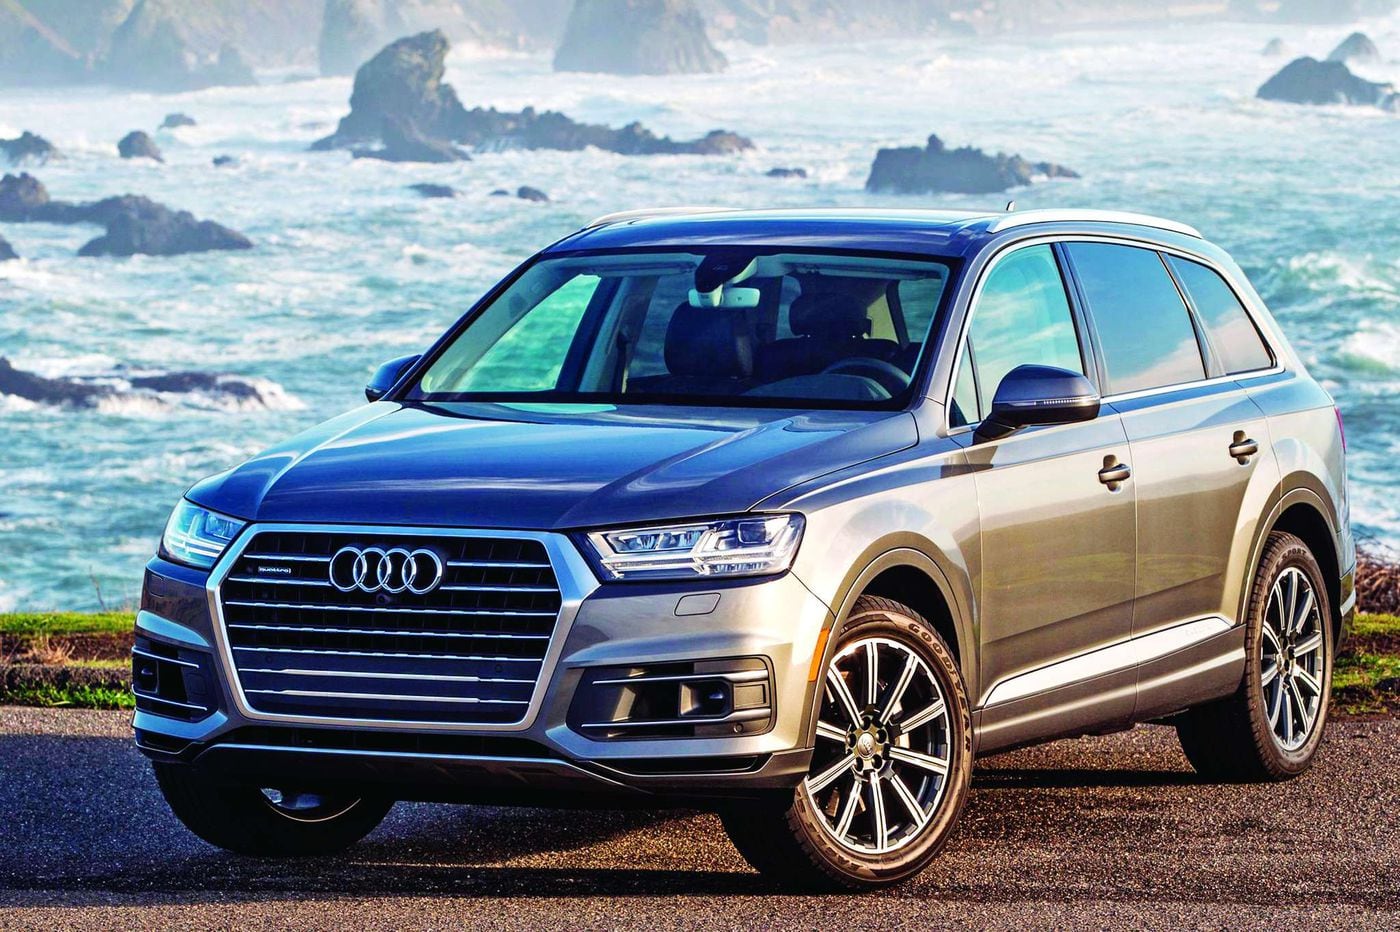 2017 Audi Q7: The pleasures of the pricier people mover